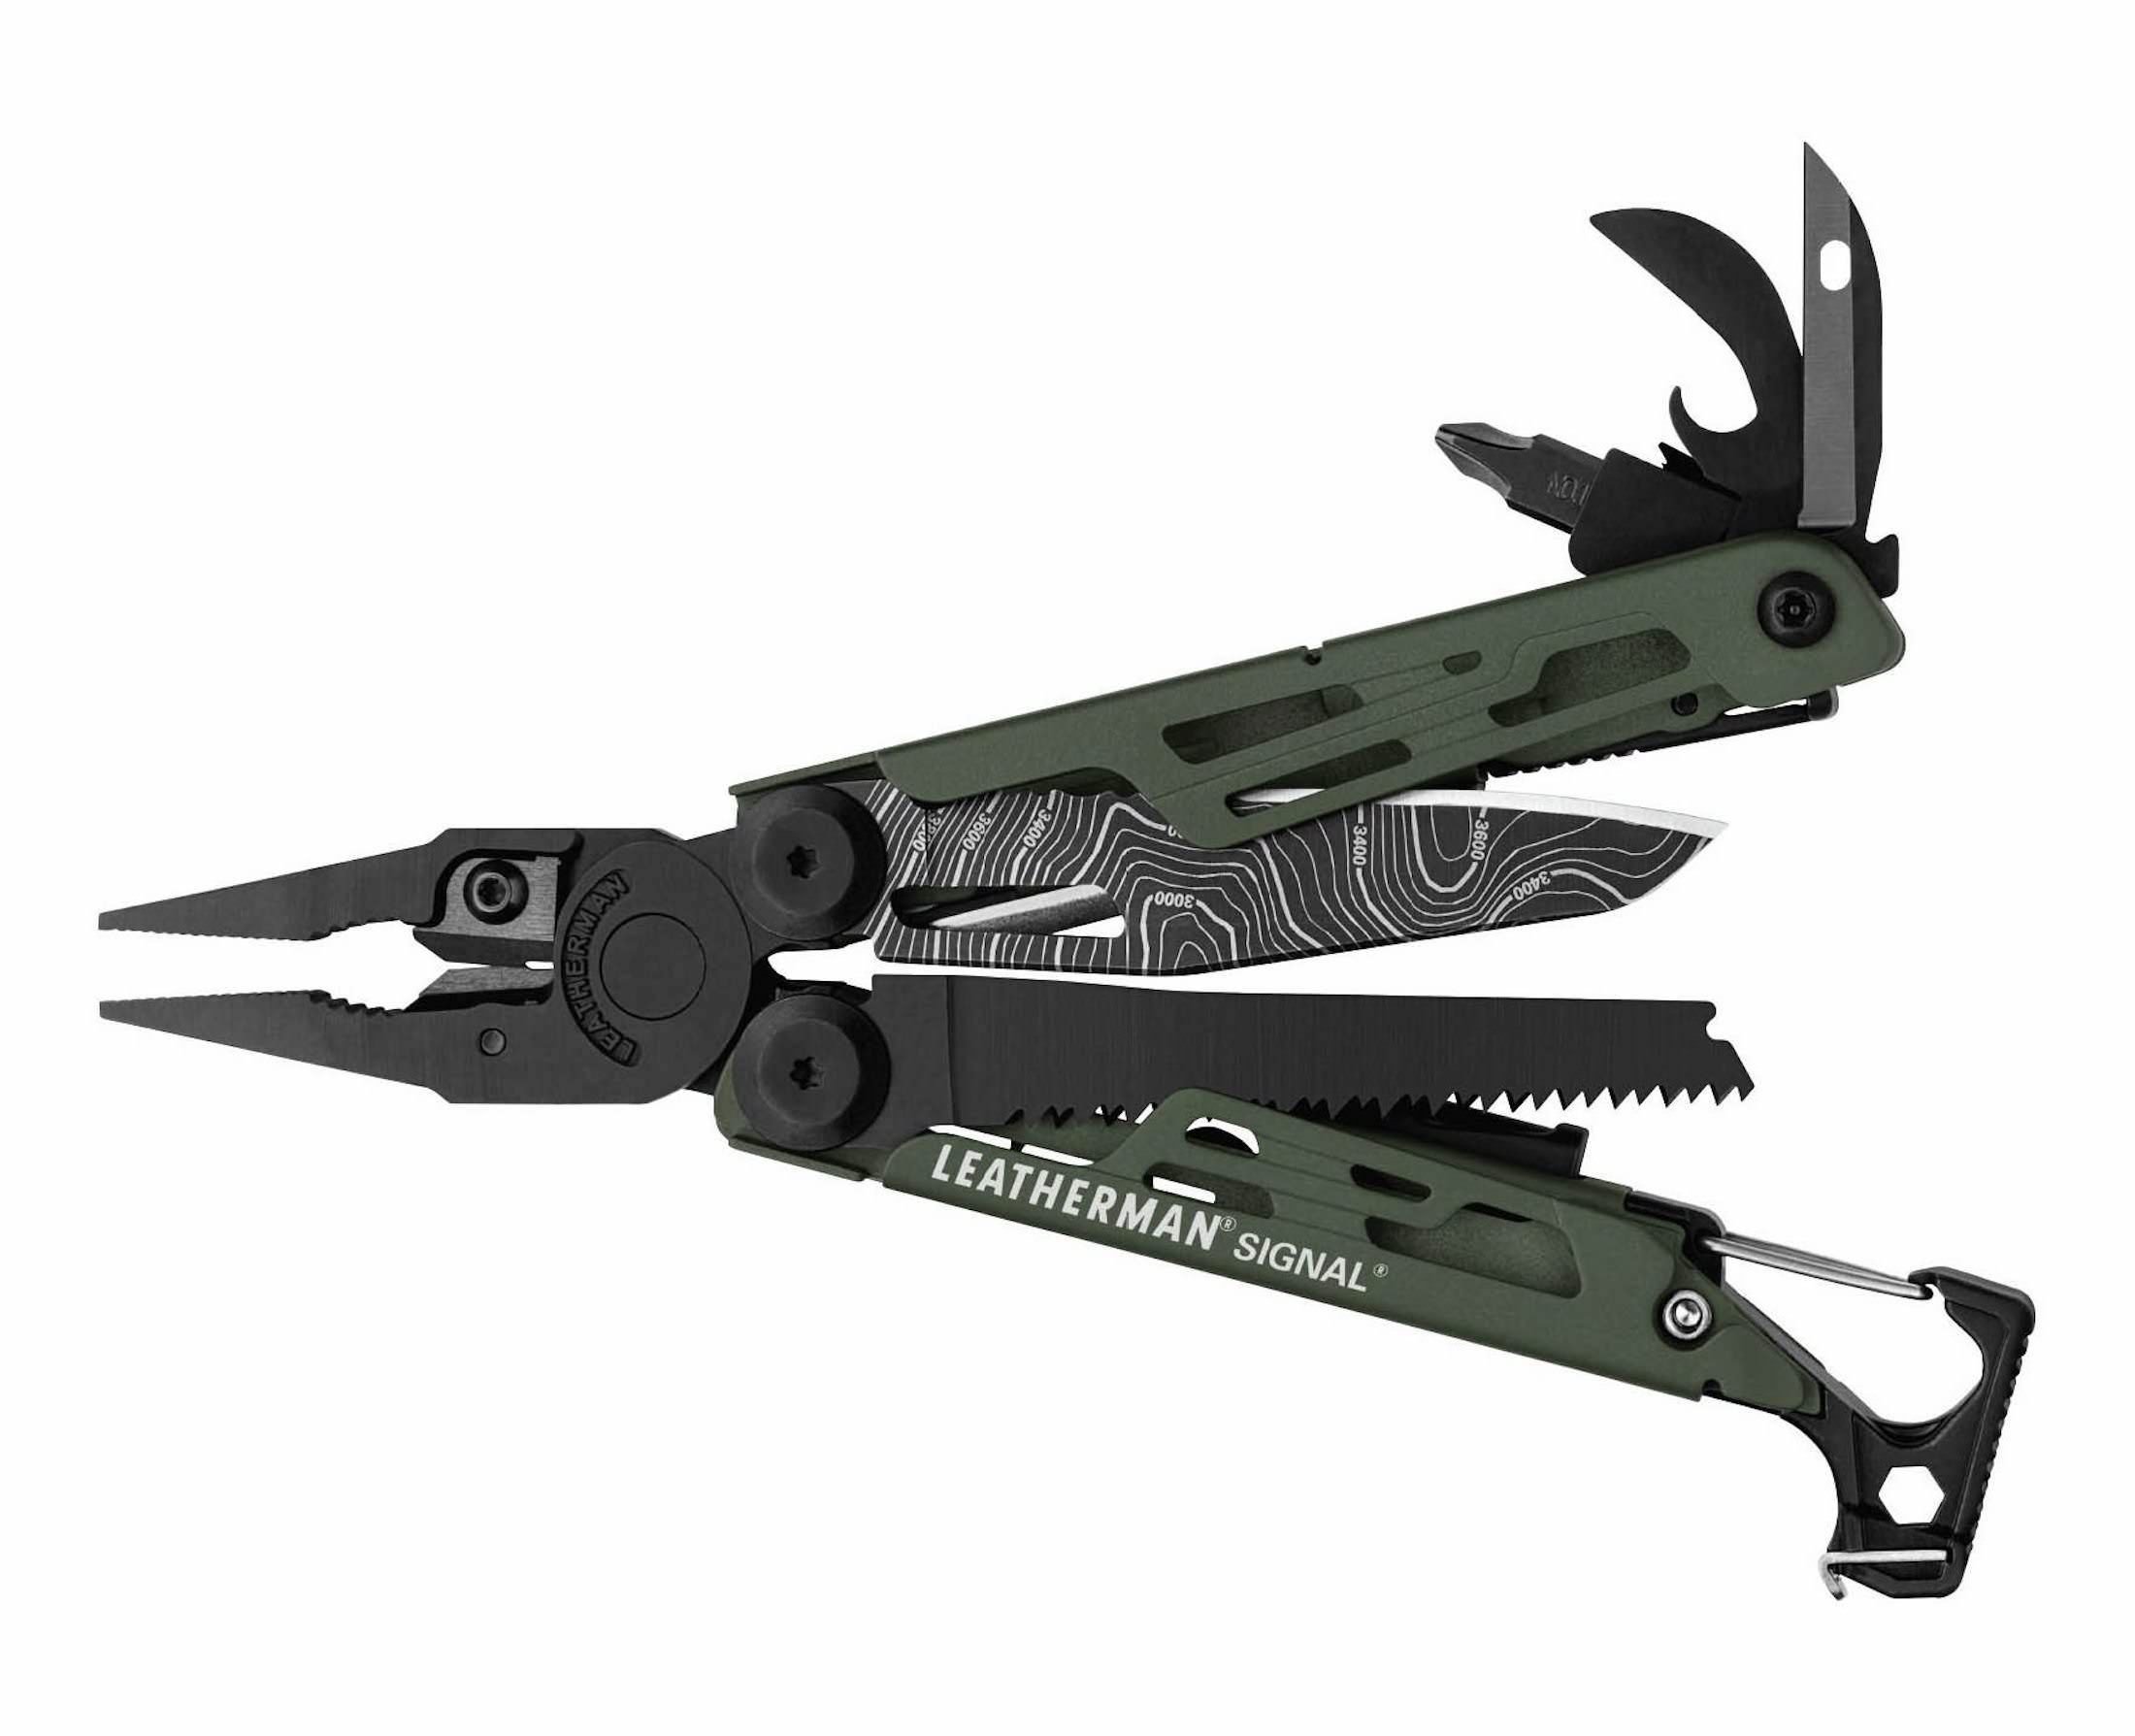 Leatherman Signal Outdoors Multi-Tool is Now Available in More Colors